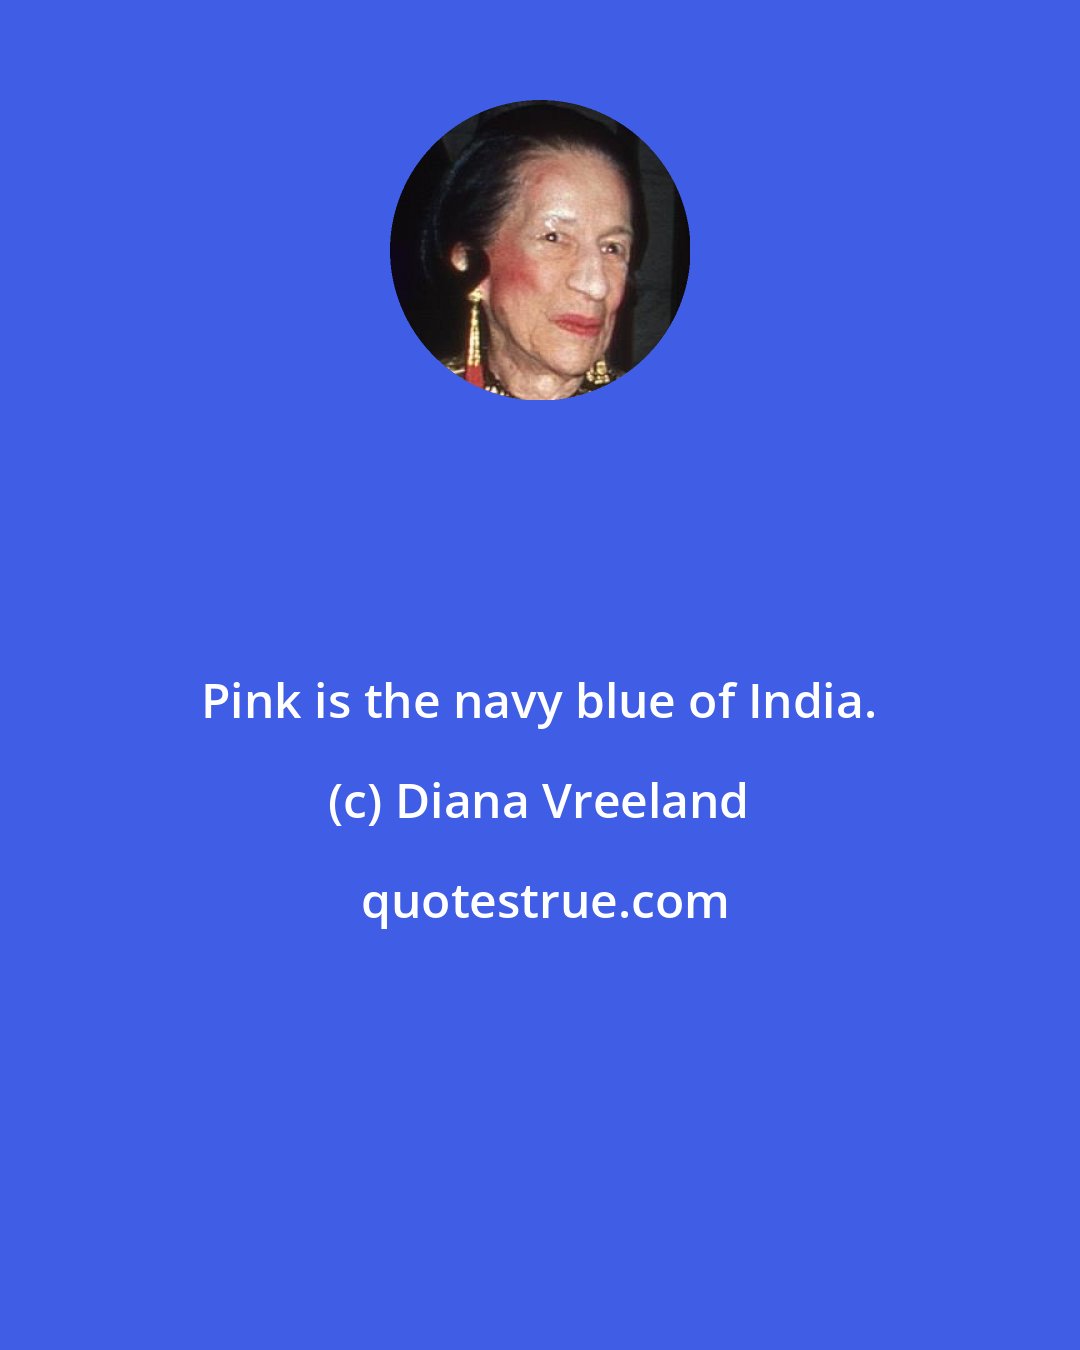 Diana Vreeland: Pink is the navy blue of India.